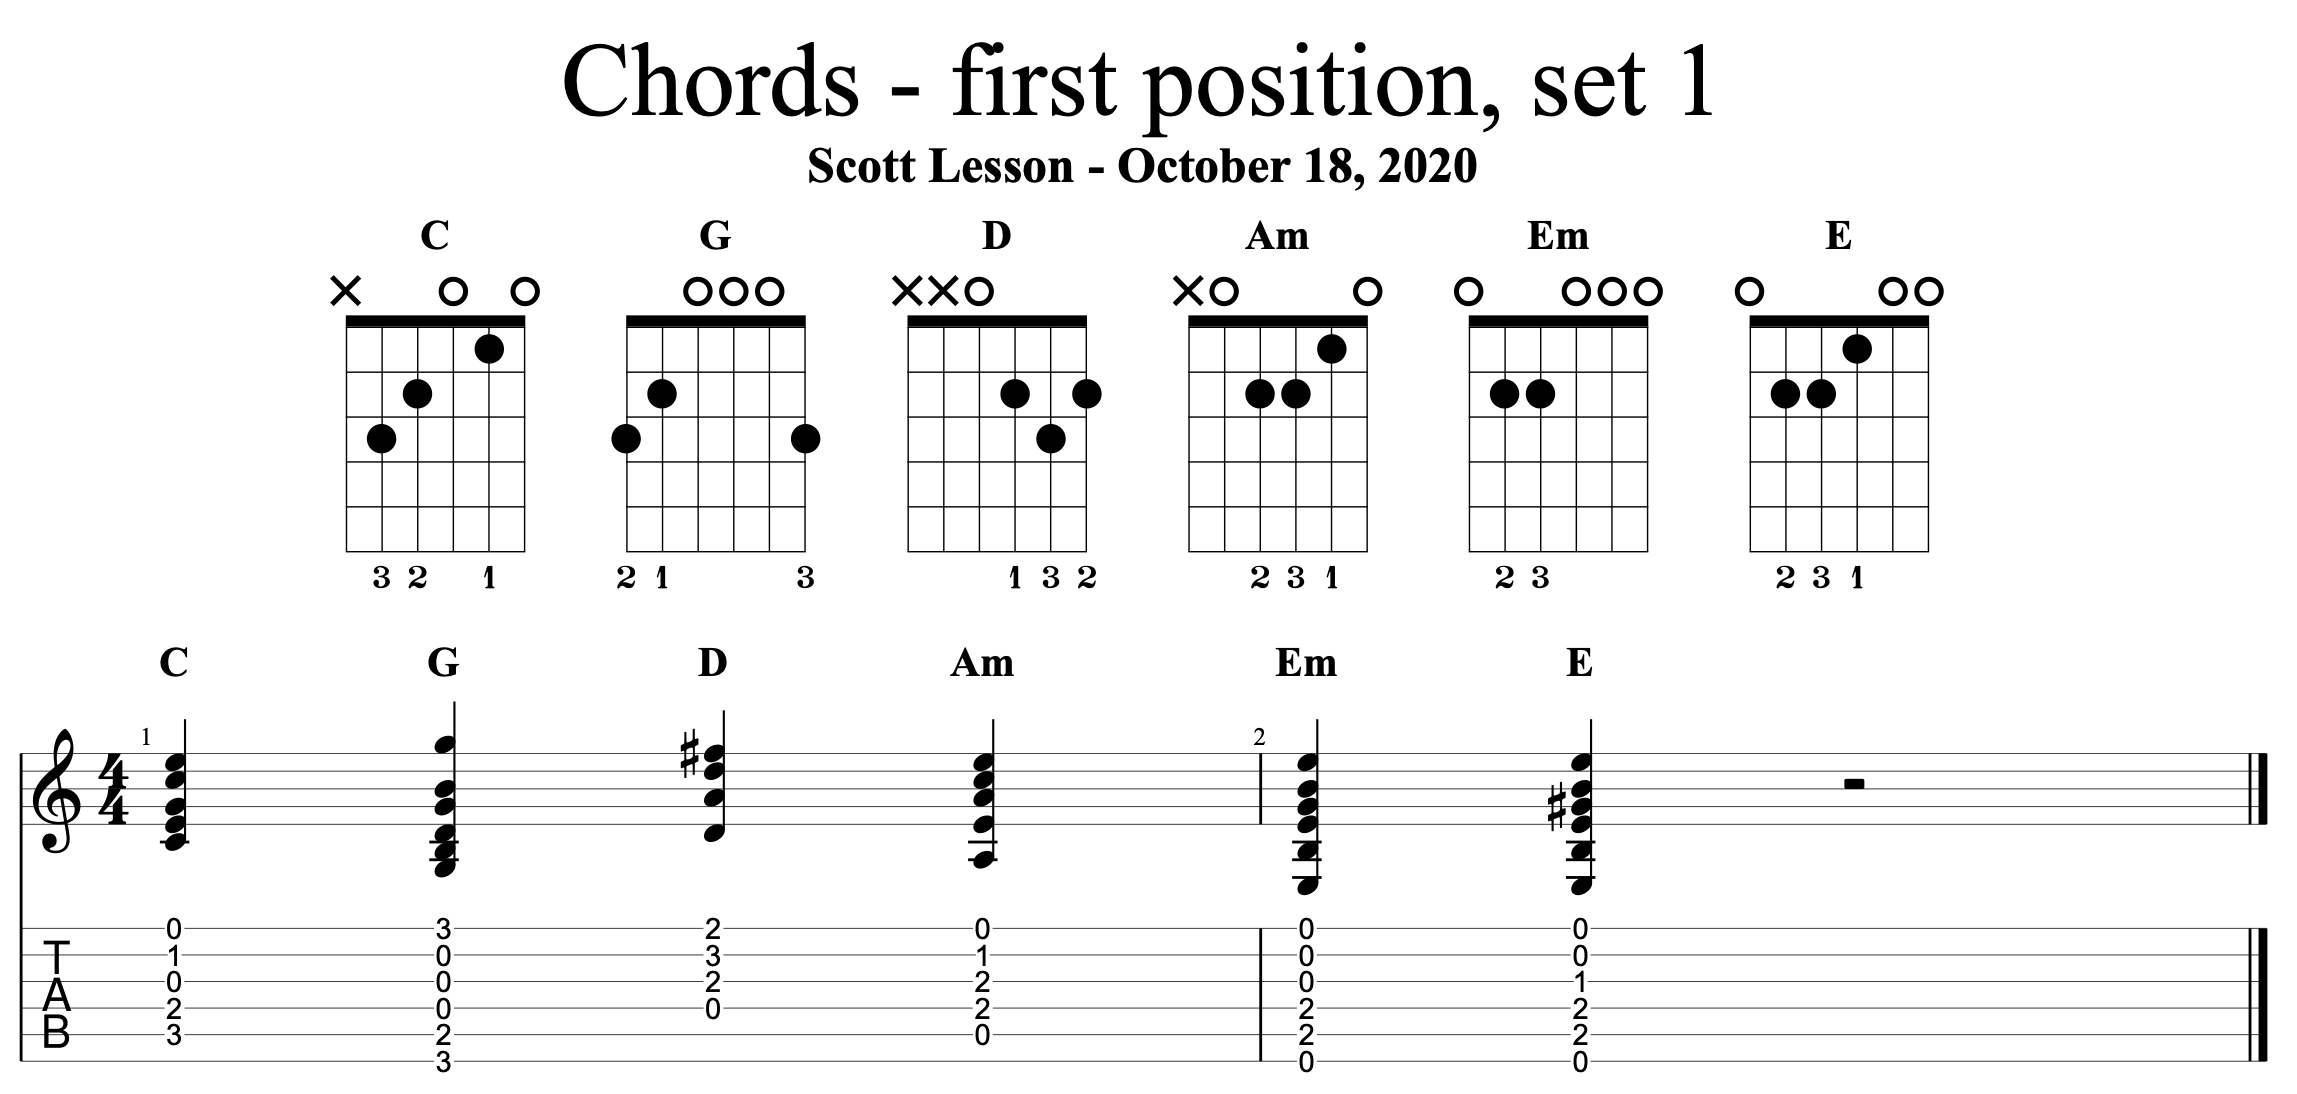 Chords - first position, set 1